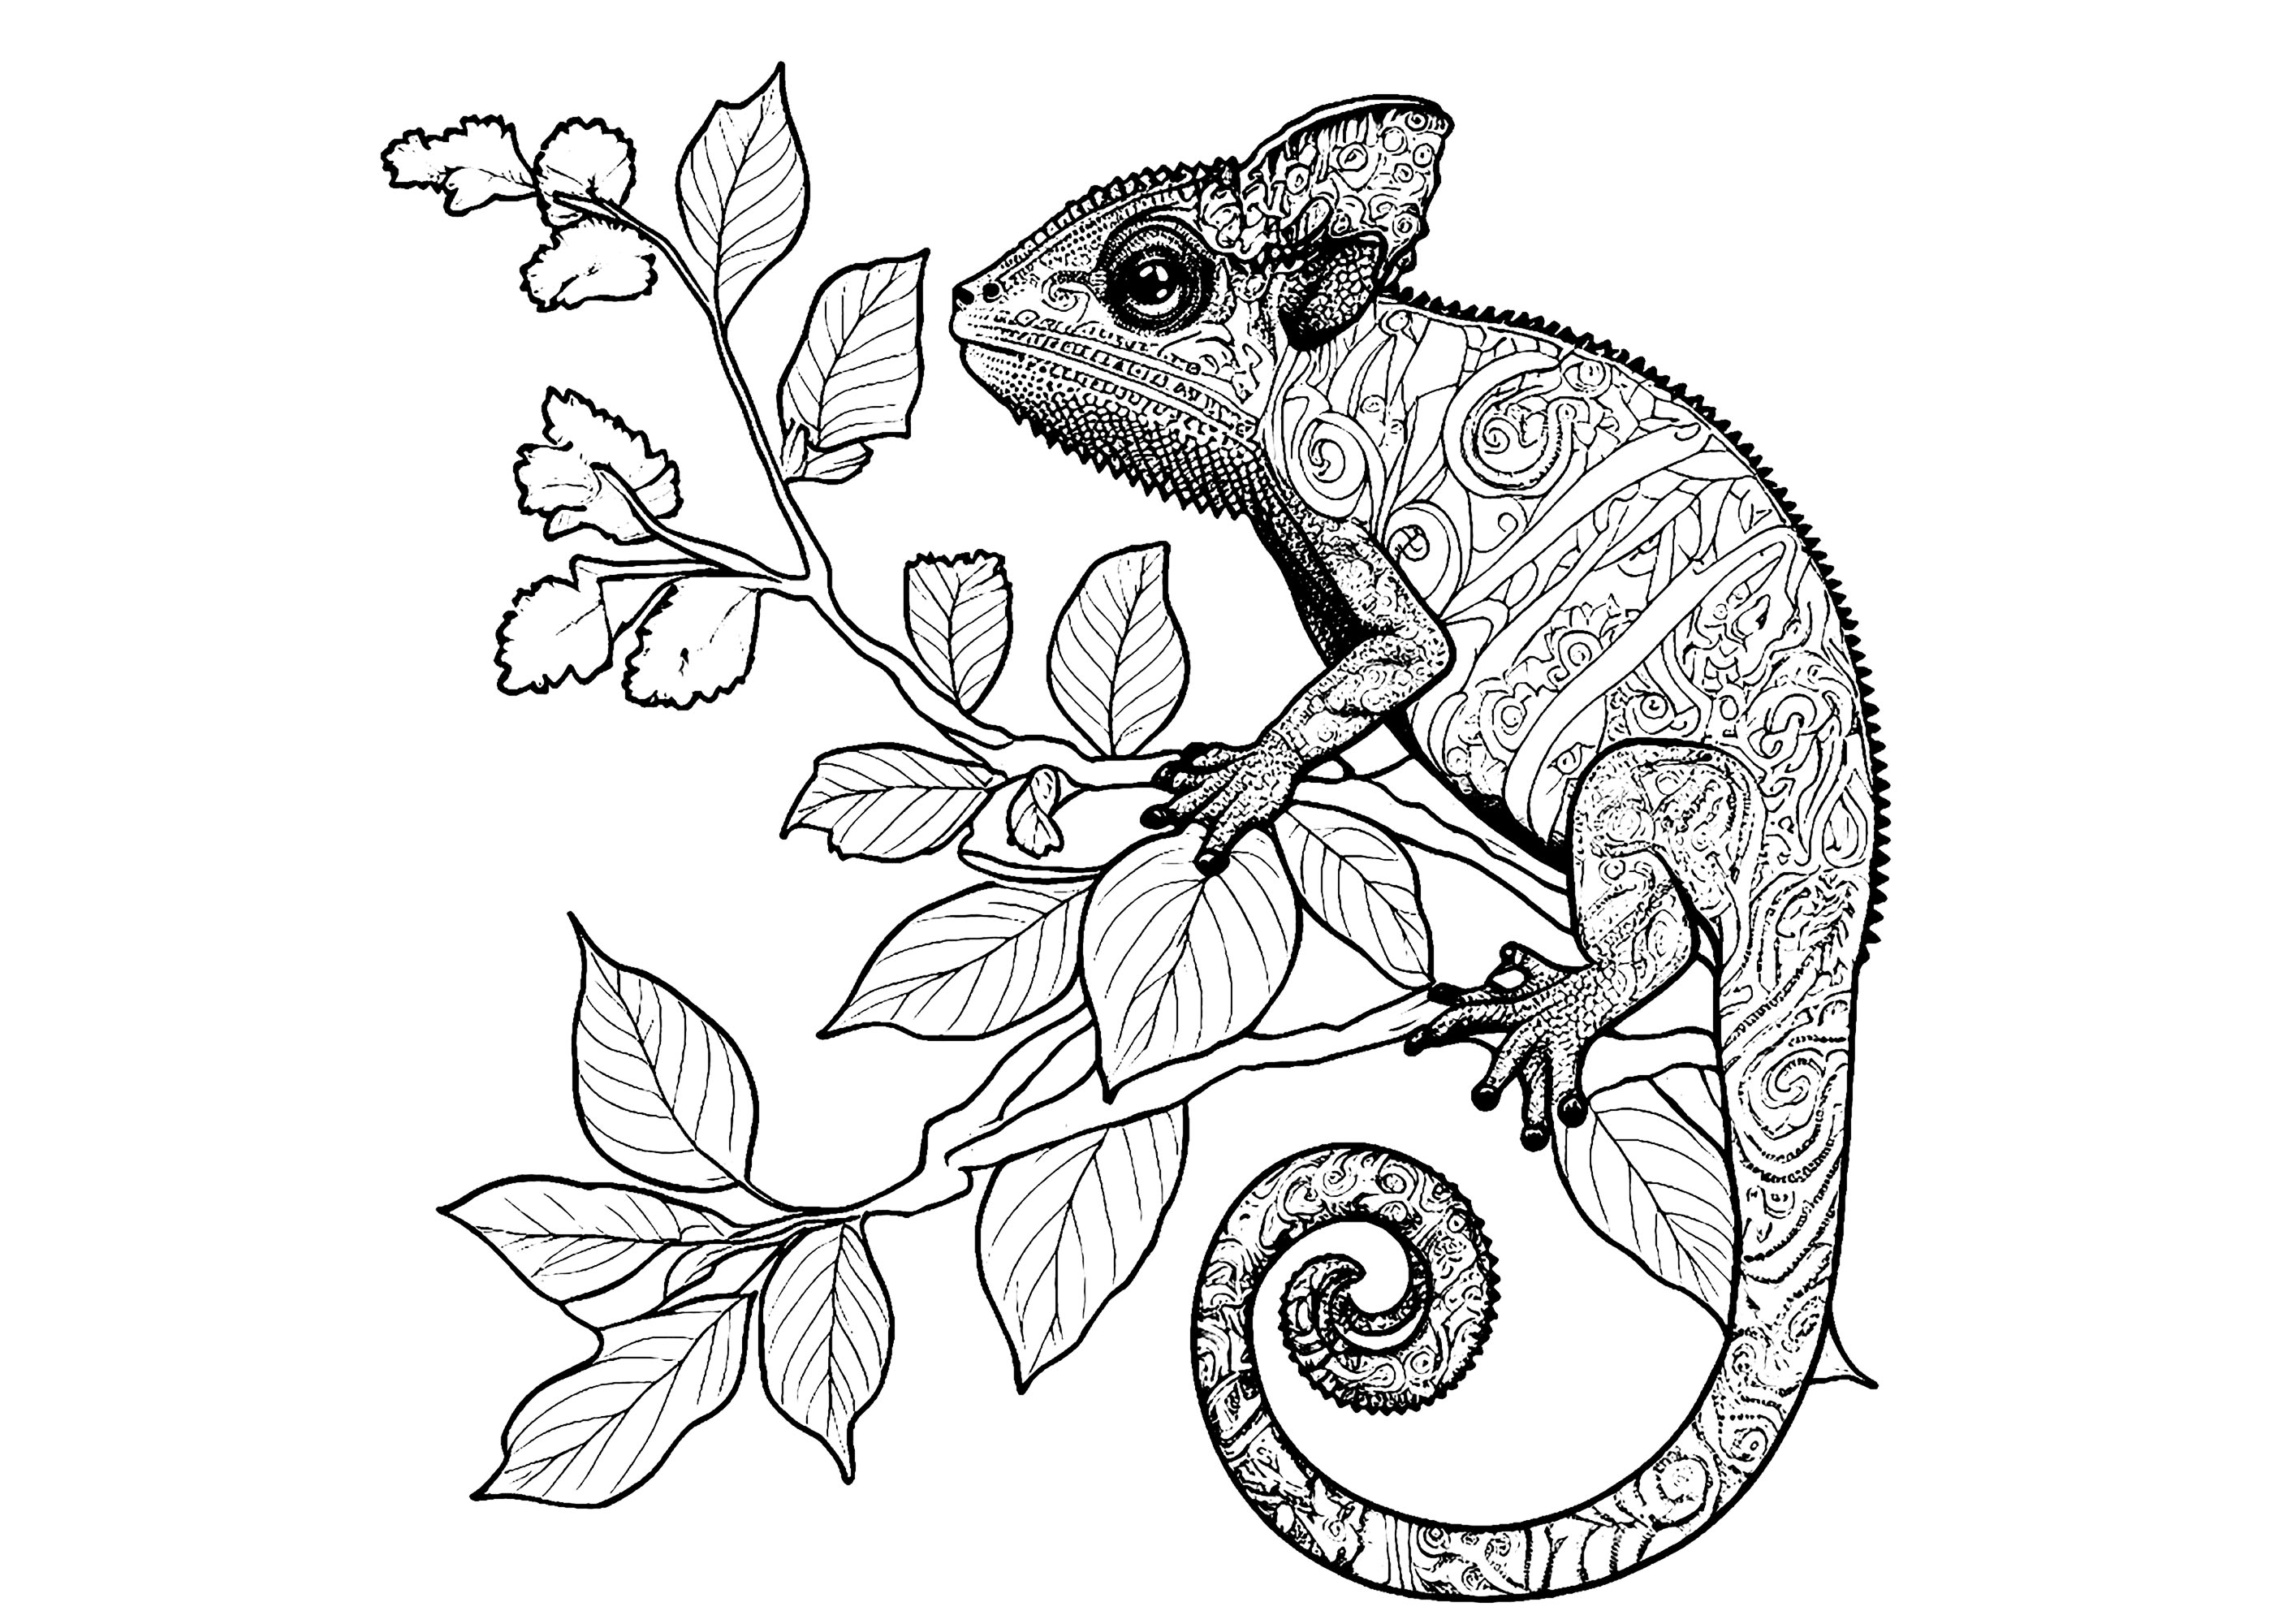 Coloring of a chameleon full of details, posed on a flowery branch